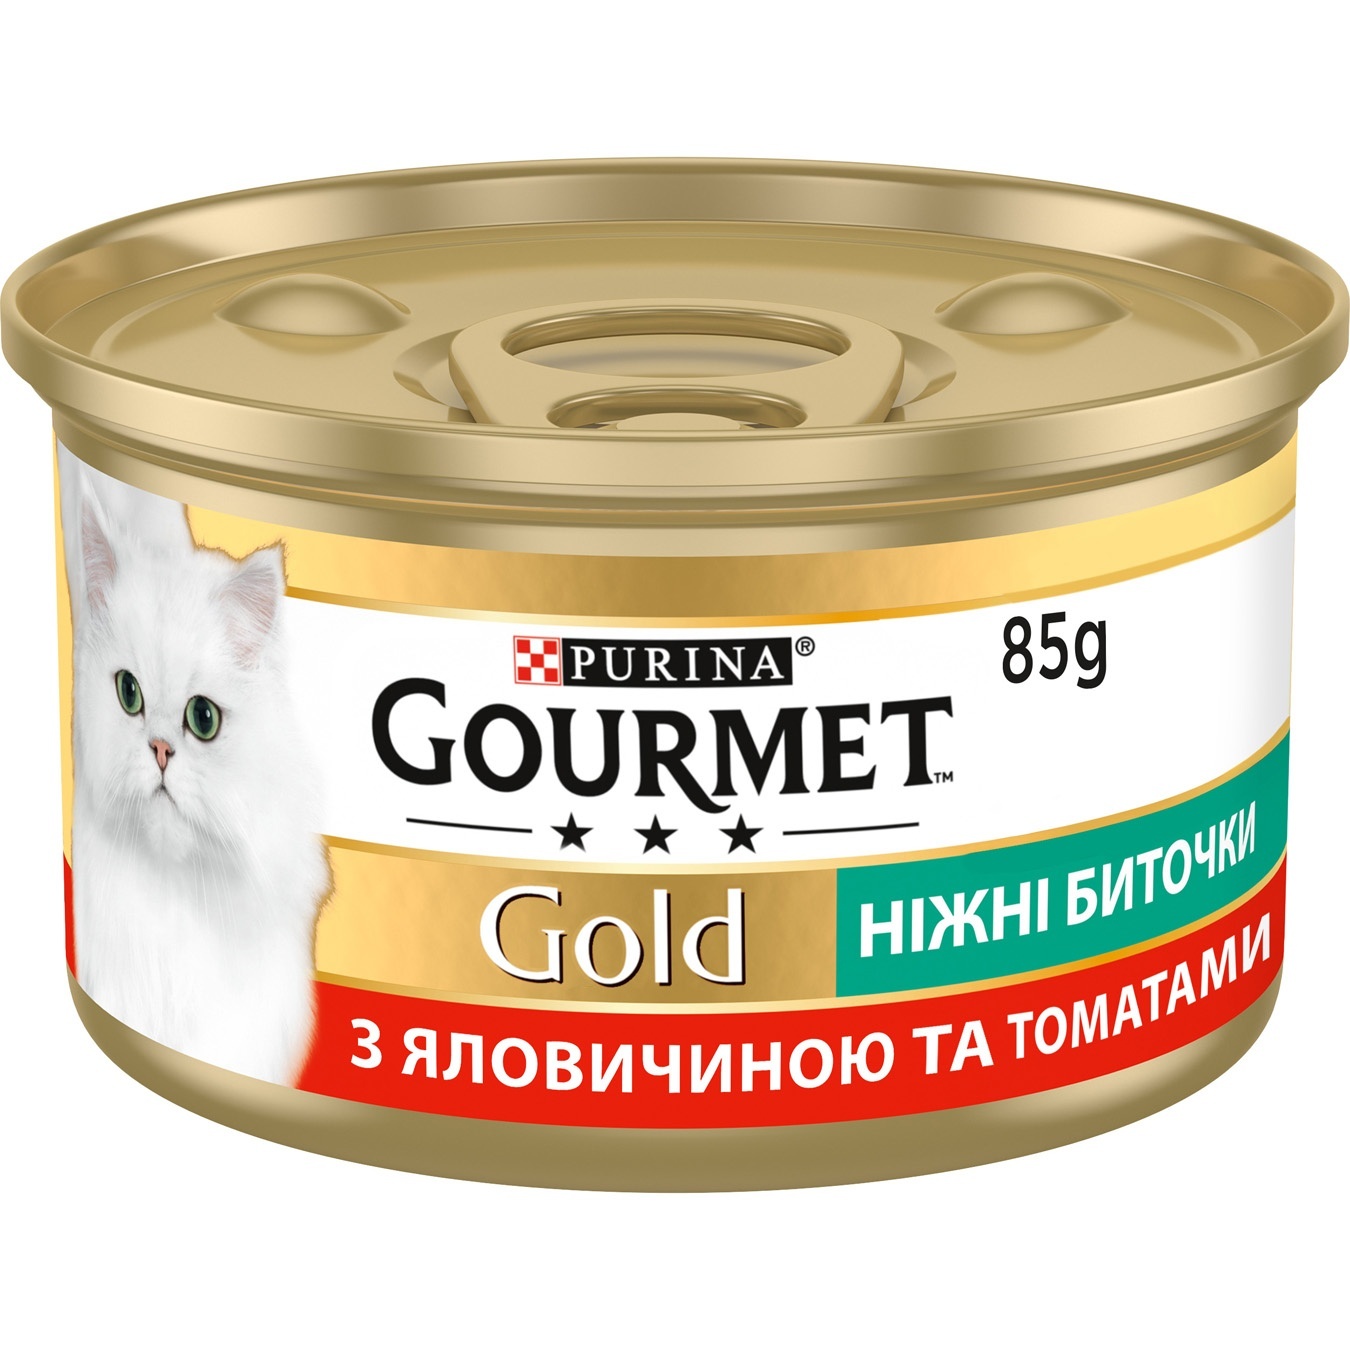 Purina Gourmet for cats canned with beef and tomato food 85g